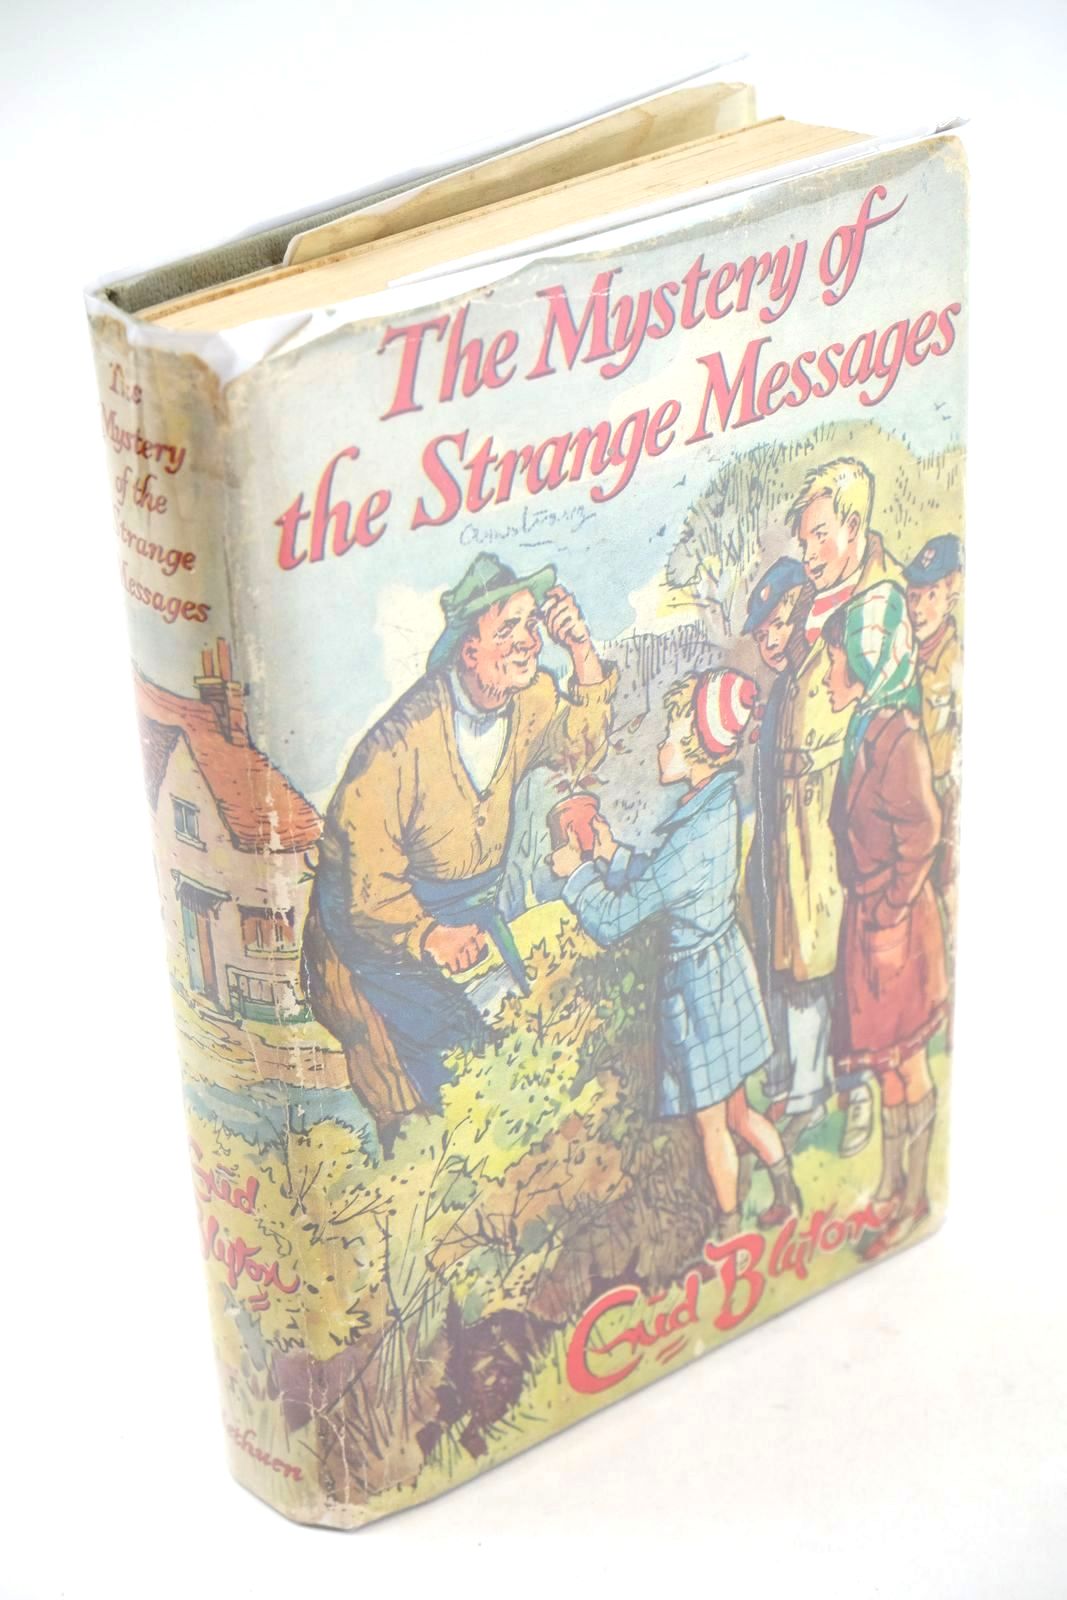 Photo of THE MYSTERY OF THE STRANGE MESSAGES written by Blyton, Enid illustrated by Buchanan, Lilian published by Methuen & Co. Ltd. (STOCK CODE: 1325174)  for sale by Stella & Rose's Books